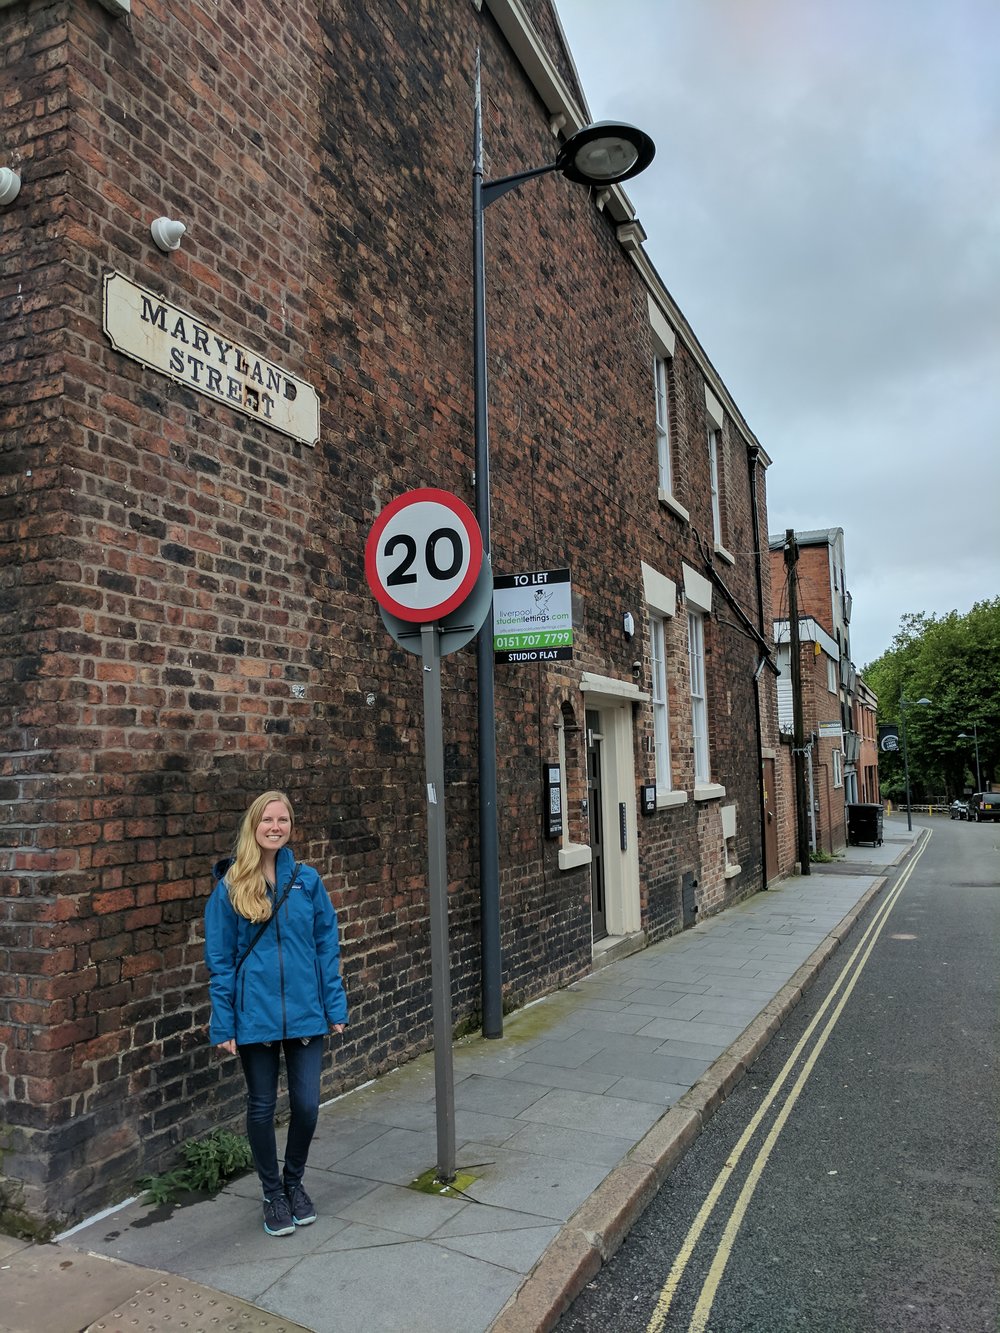  Maryland Street in Liverpool 